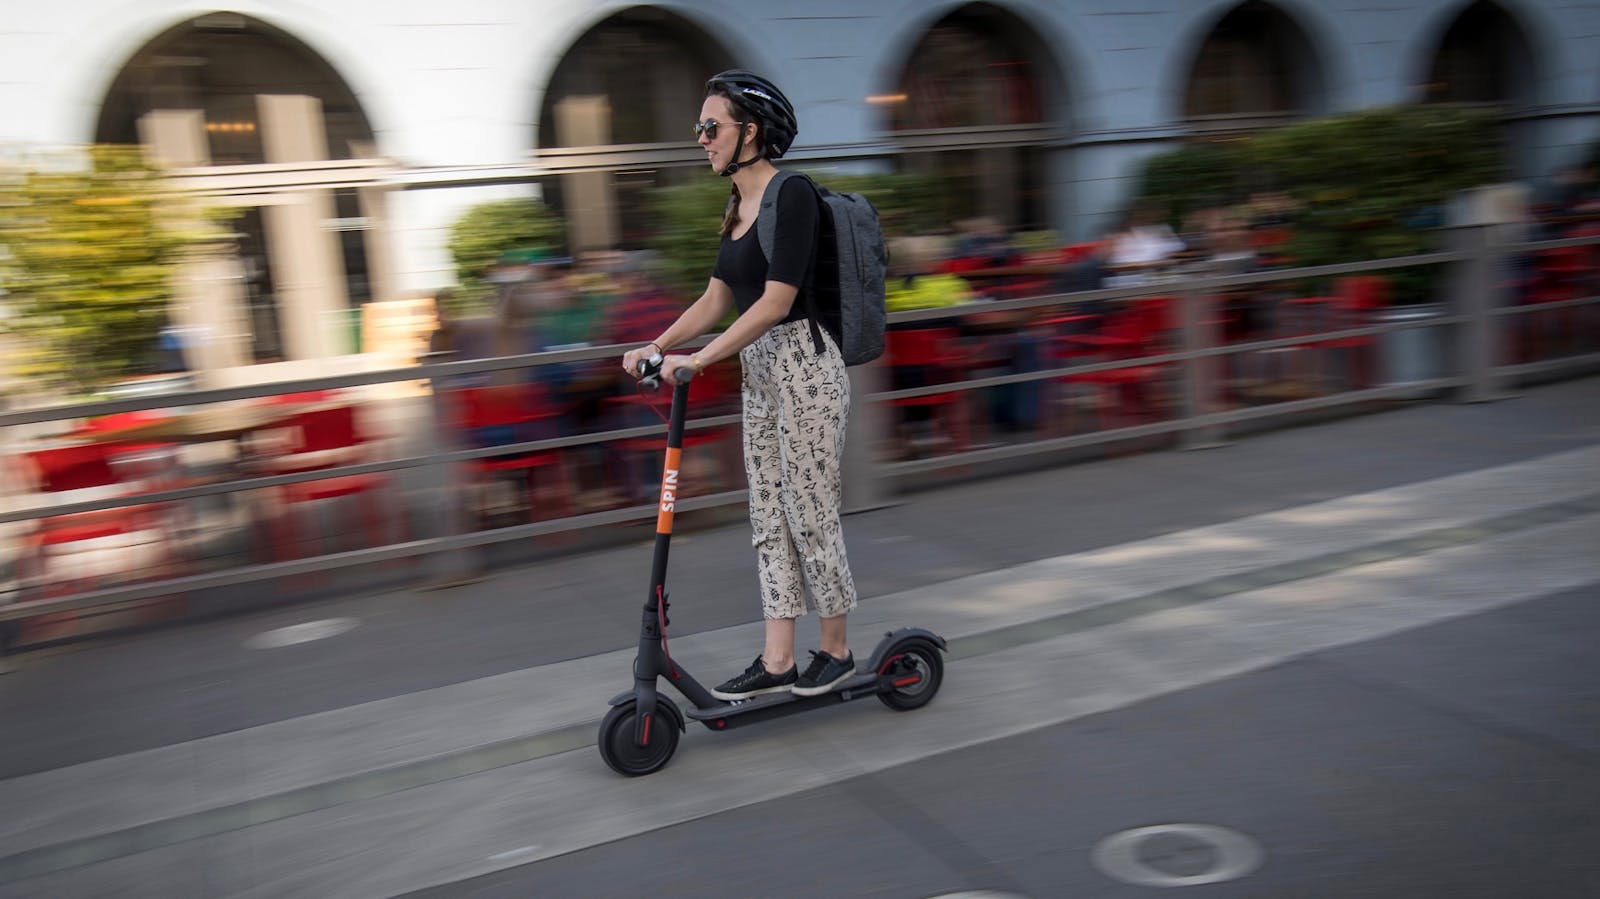 A person riding a scooter in San Francisco last week. Photo: Bloomberg